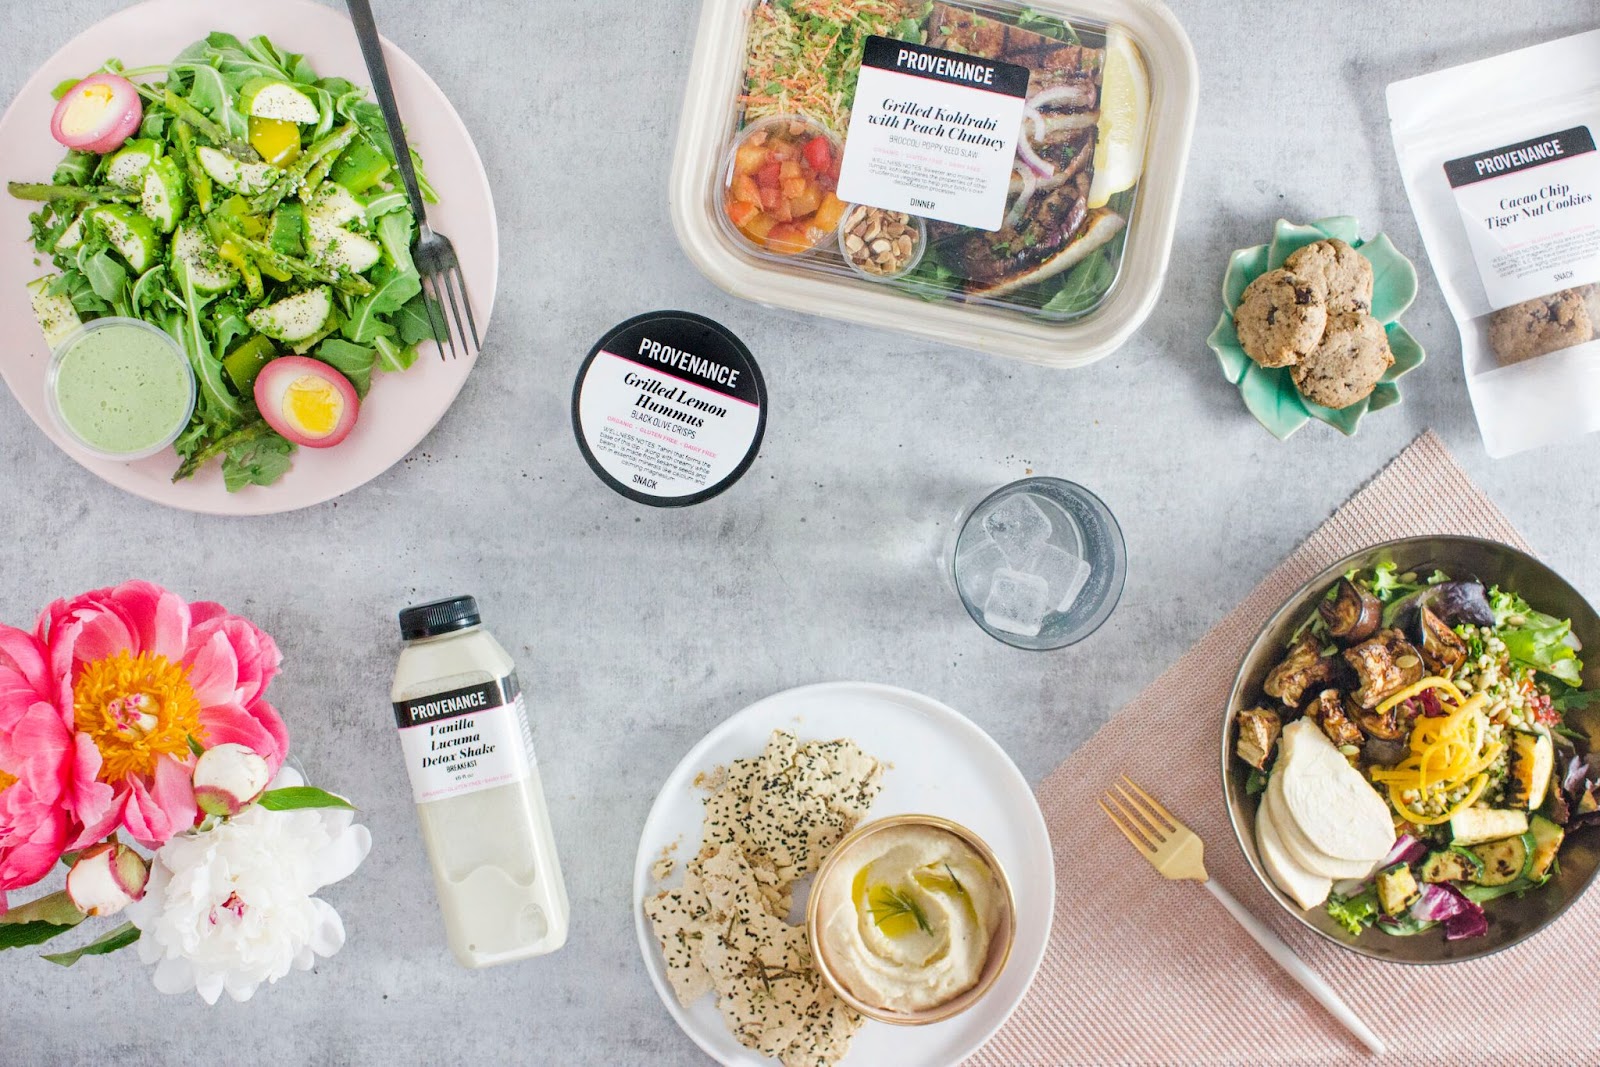 Check Out the 10 Best Paleo Meal Delivery Services